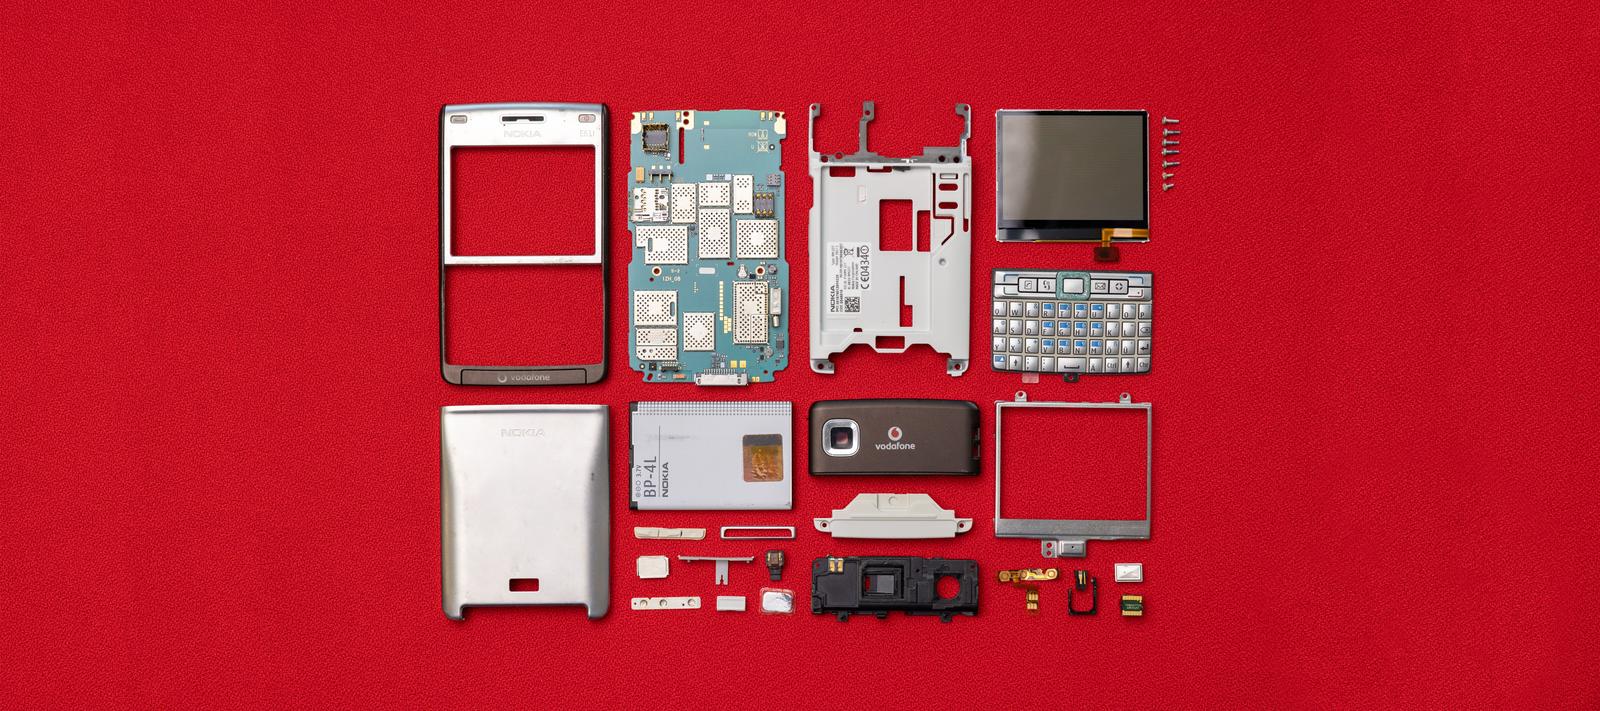 Vodafone Germany collects more than 1.5 million phones for recycling